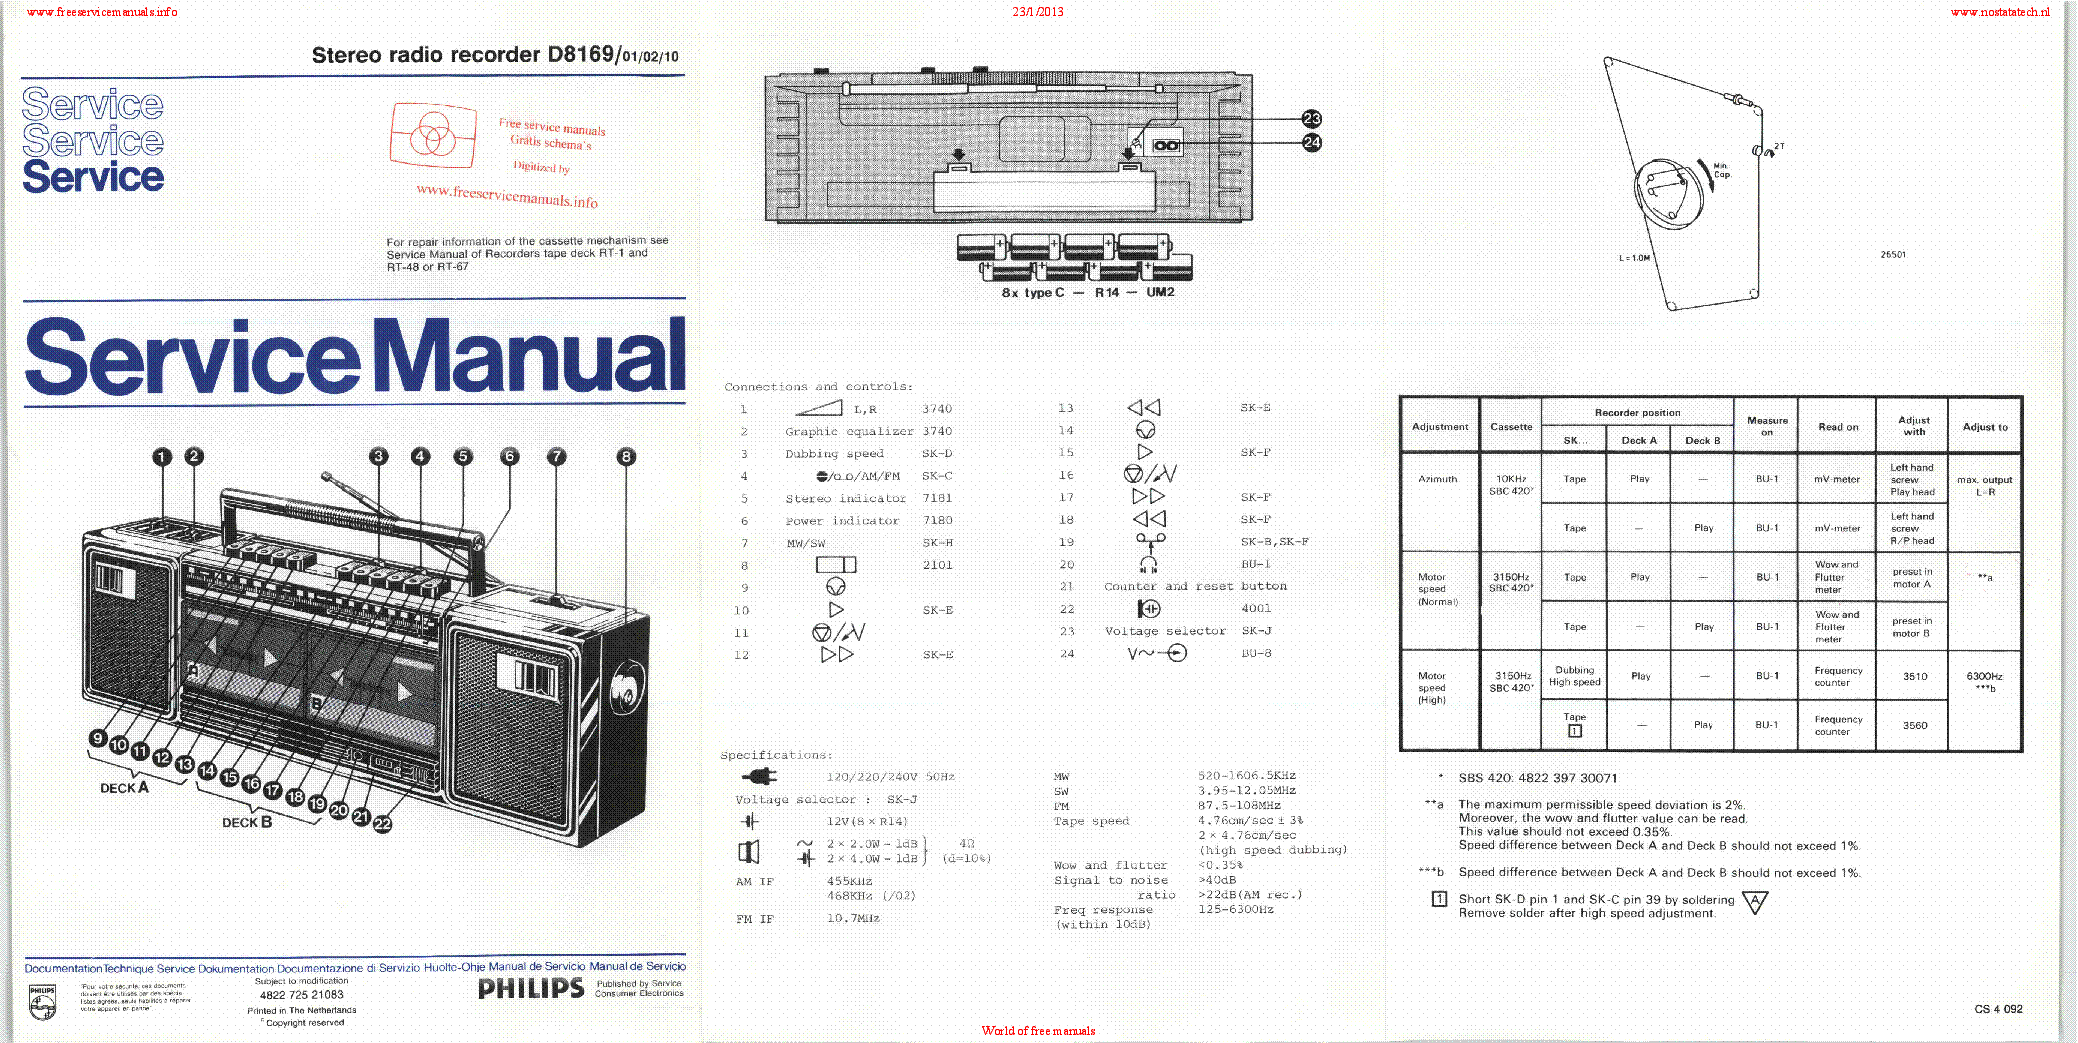 PHILIPS D8169 service manual (1st page)